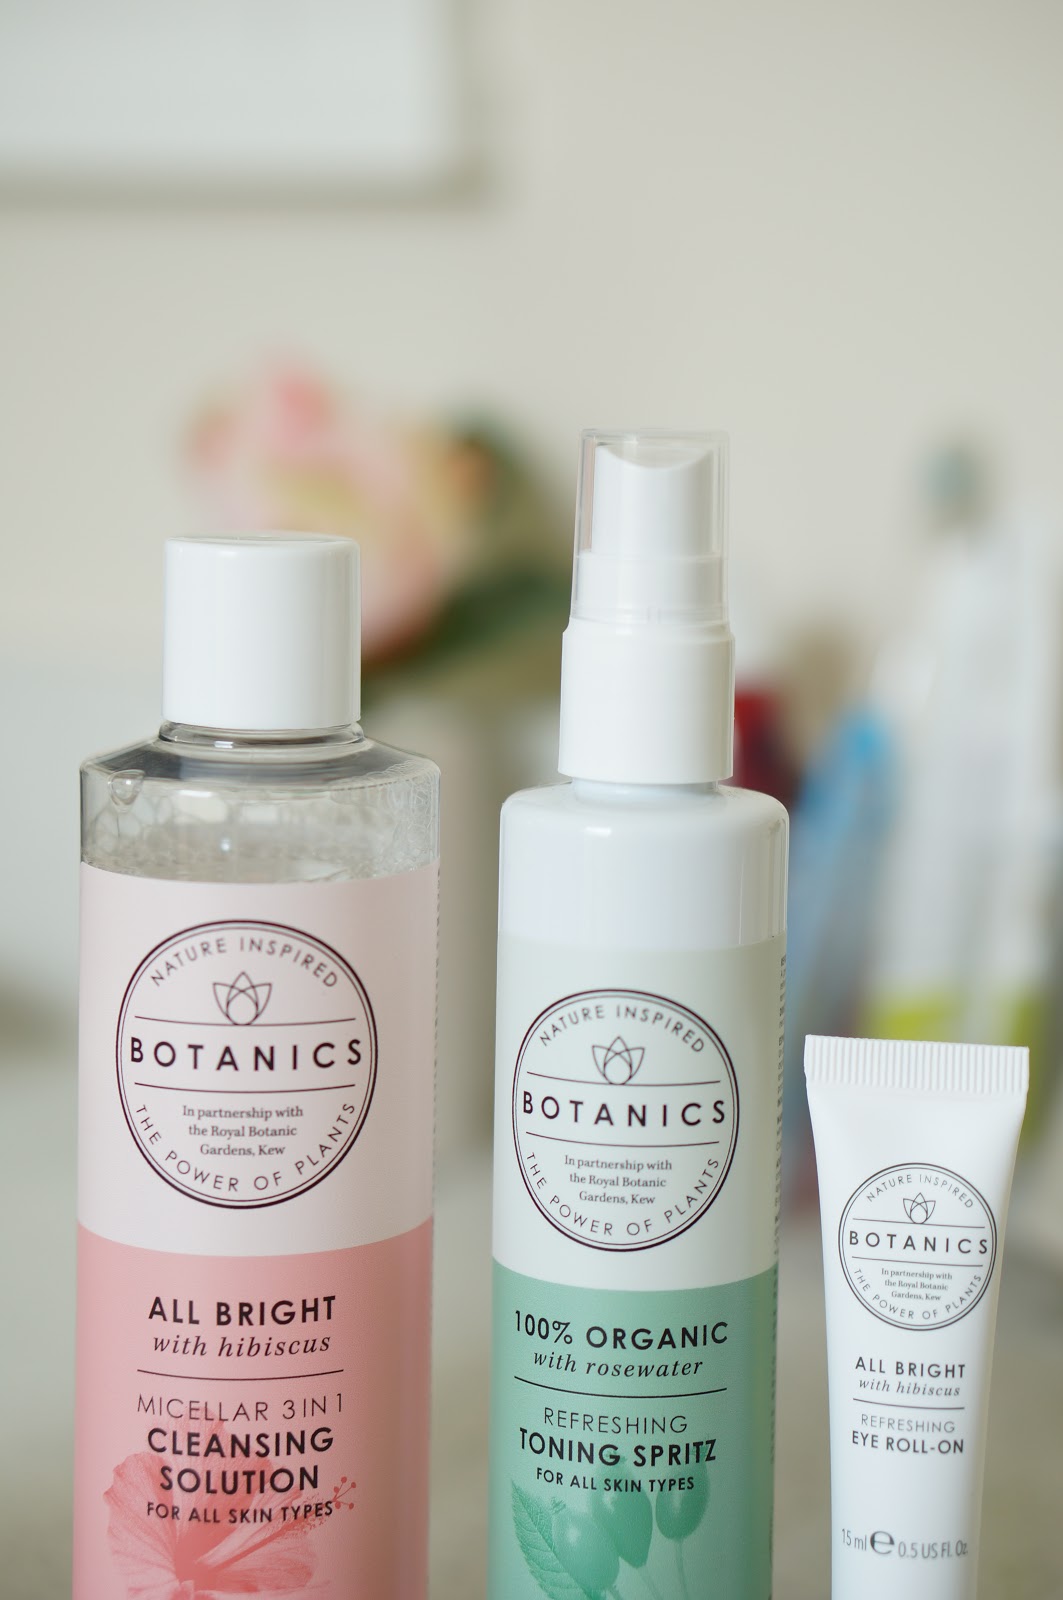 Popular North Carolina style blogger Rebecca Lately shares the recent additions to her cruelty free skincare routine.  Check it out to see what she's been using!